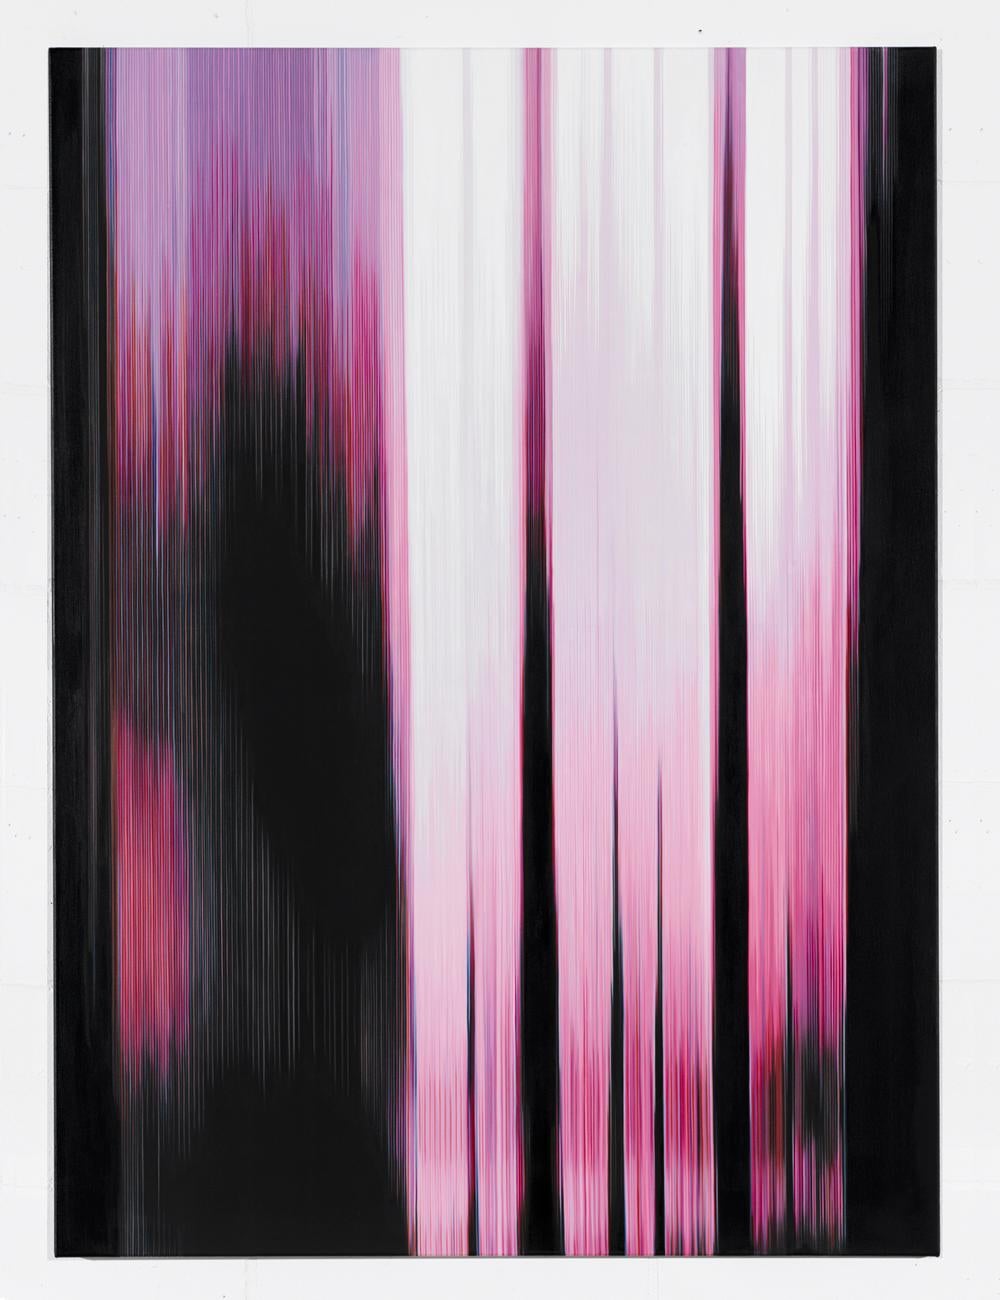 Pink Painting (Figure No.1) is a unique oil on cotton canvas painting by German contemporary artist Doris Marten, dimensions are 150 cm x 110 cm (59.1 × 43.3 in).

The artwork is signed, sold unframed and comes with a certificate of